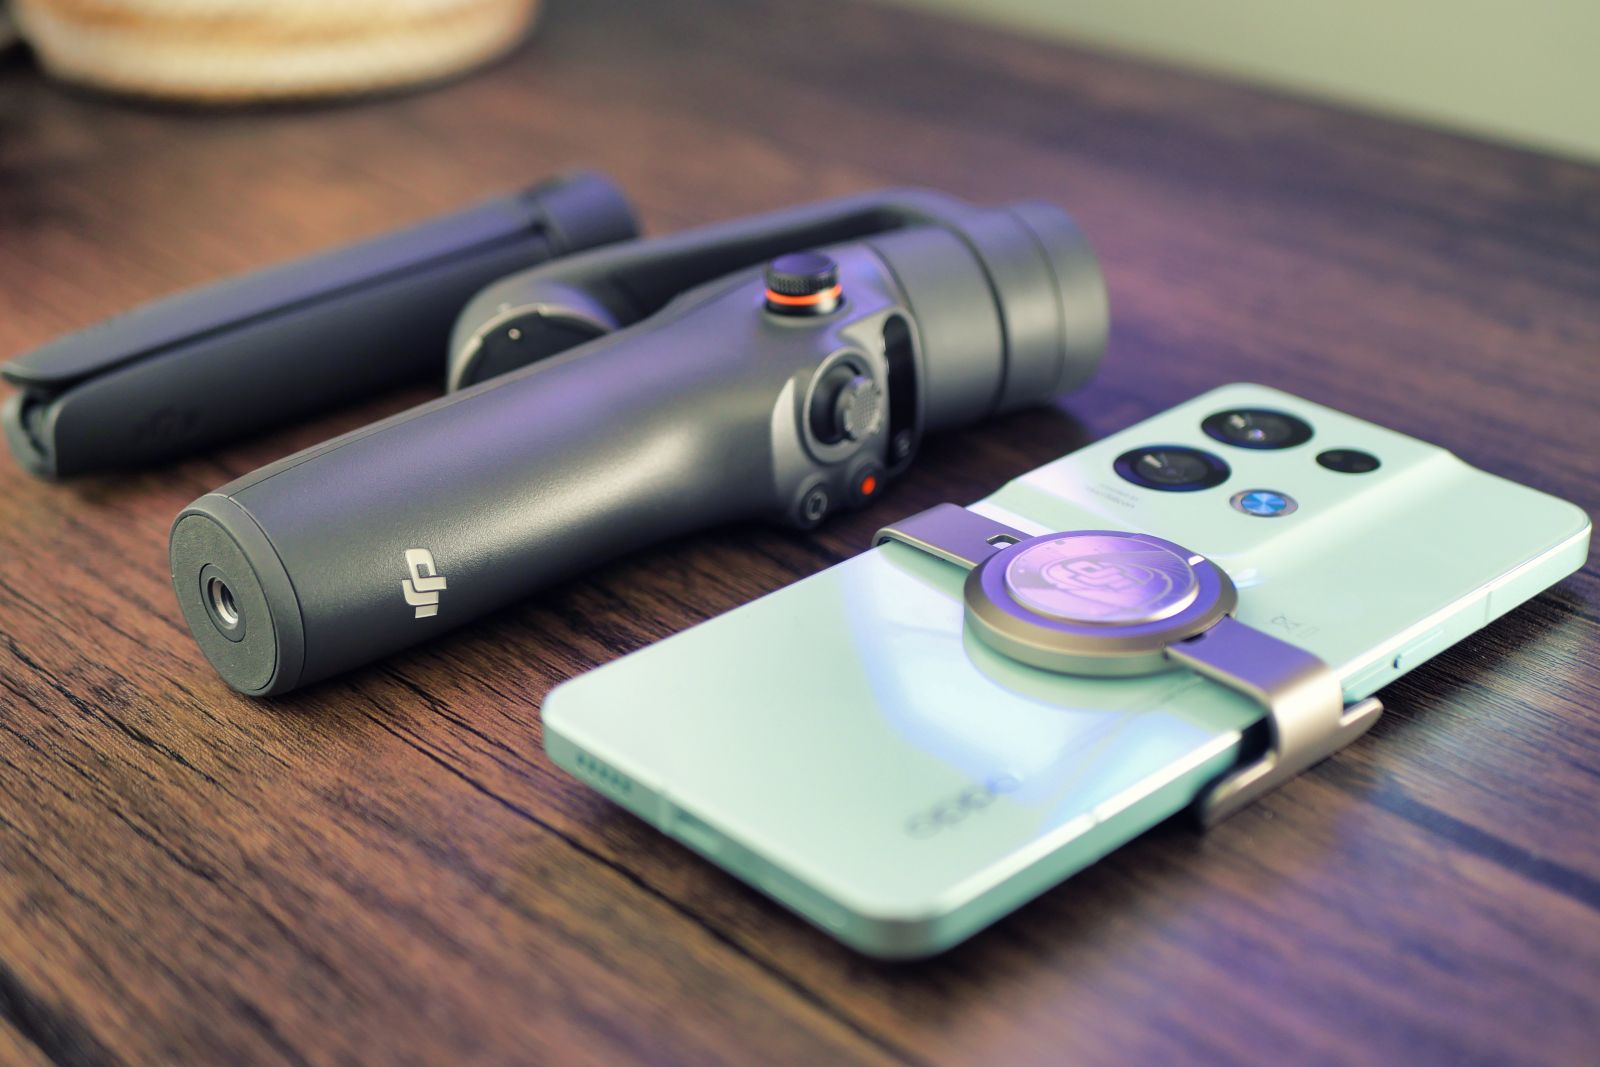 The DJI Osmo Mobile 6 comes with an exclusive feature for iPhone users 